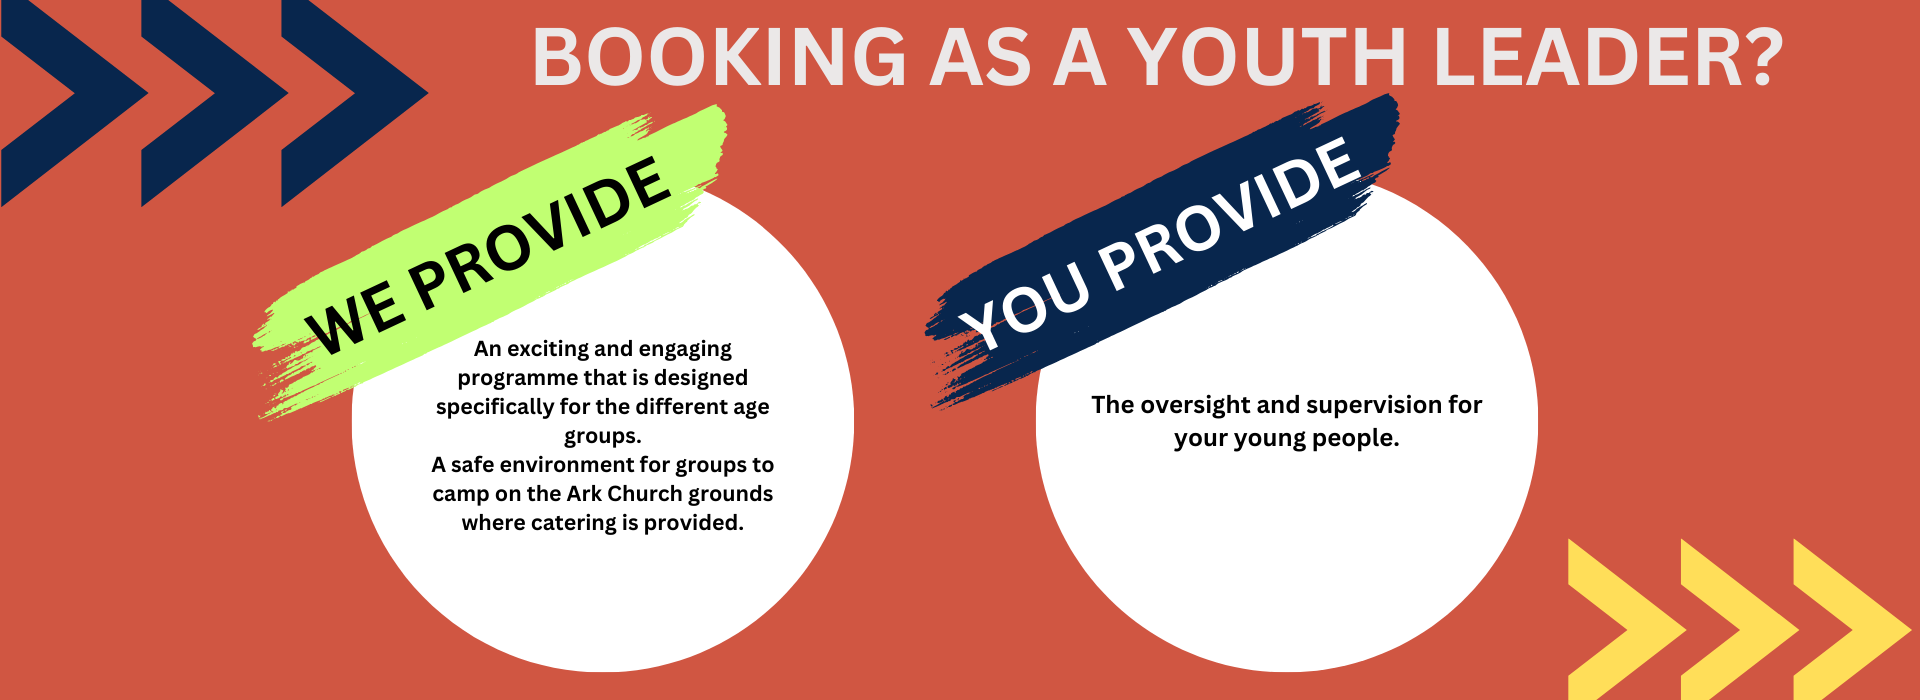 booking as youth leader